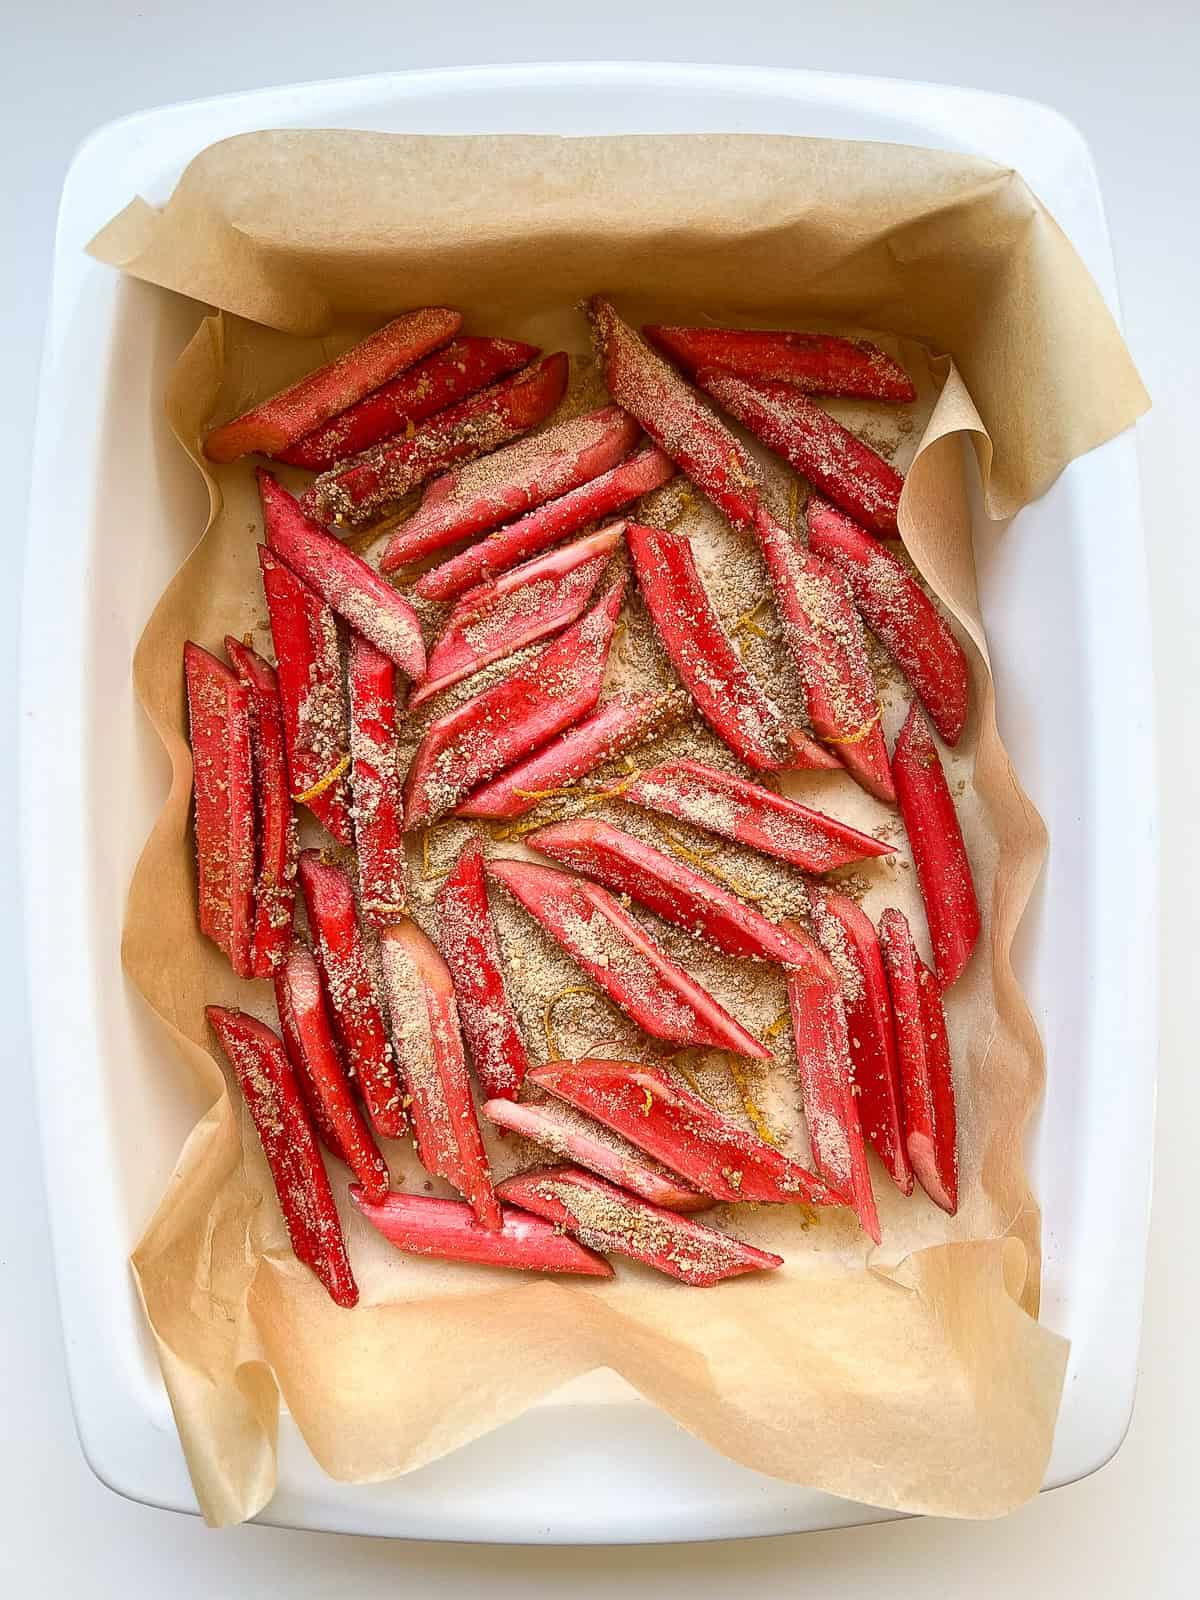 An image of cut rhubarb in a roasting tray before roasting.